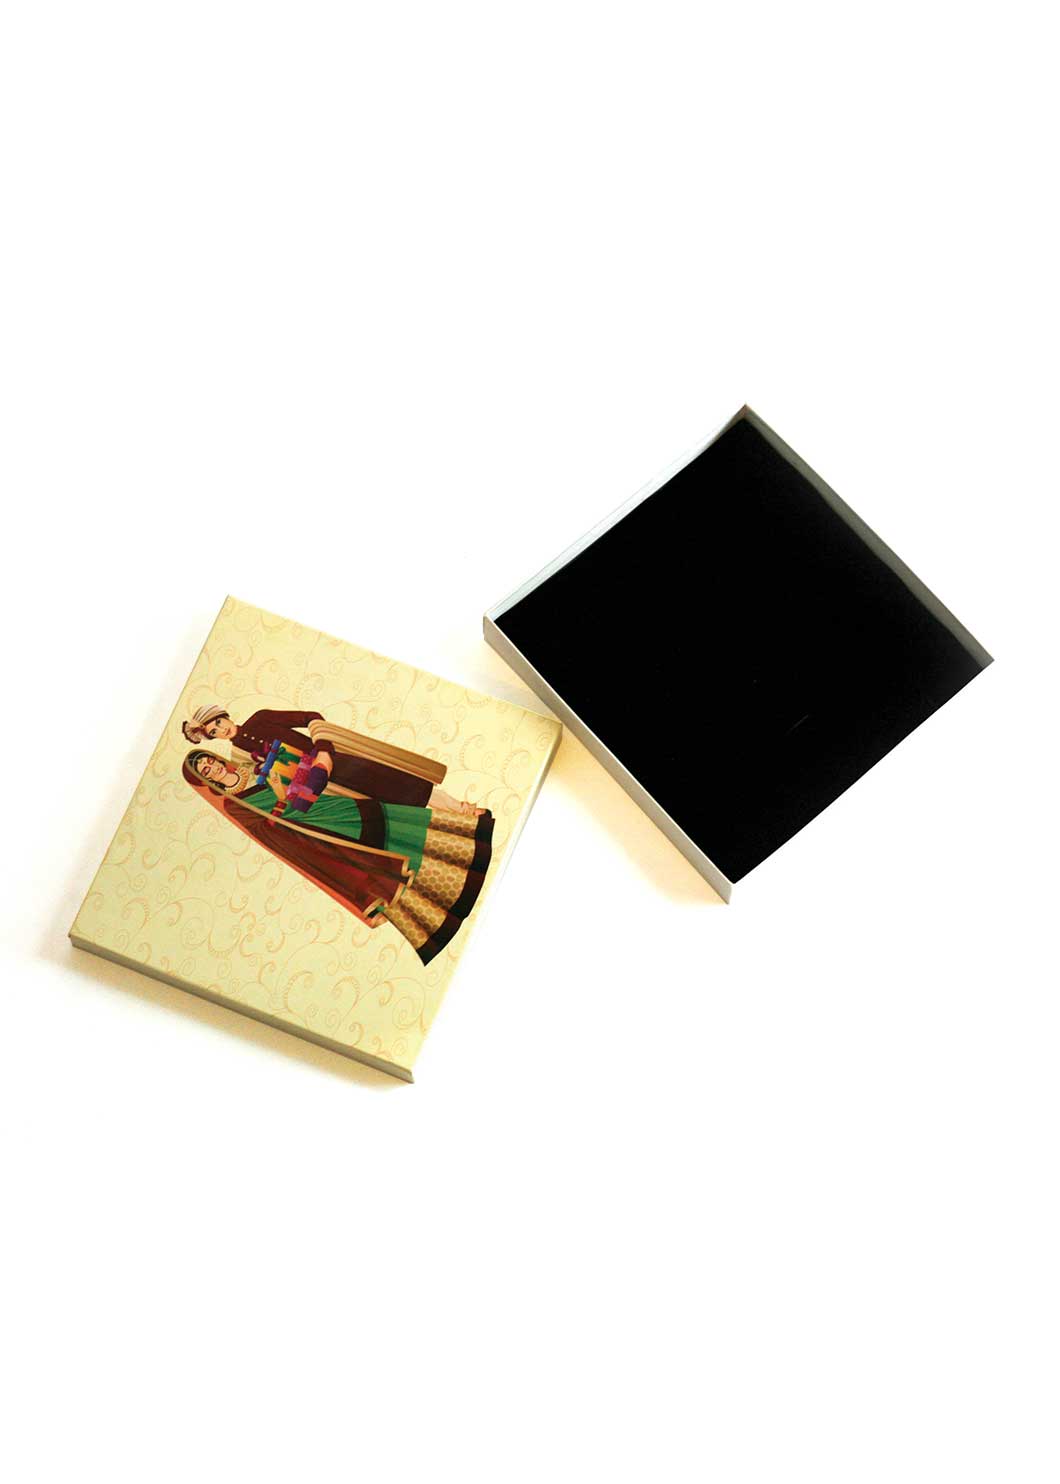 Him and Her - Wedding Photography Box- Cloth packaging box